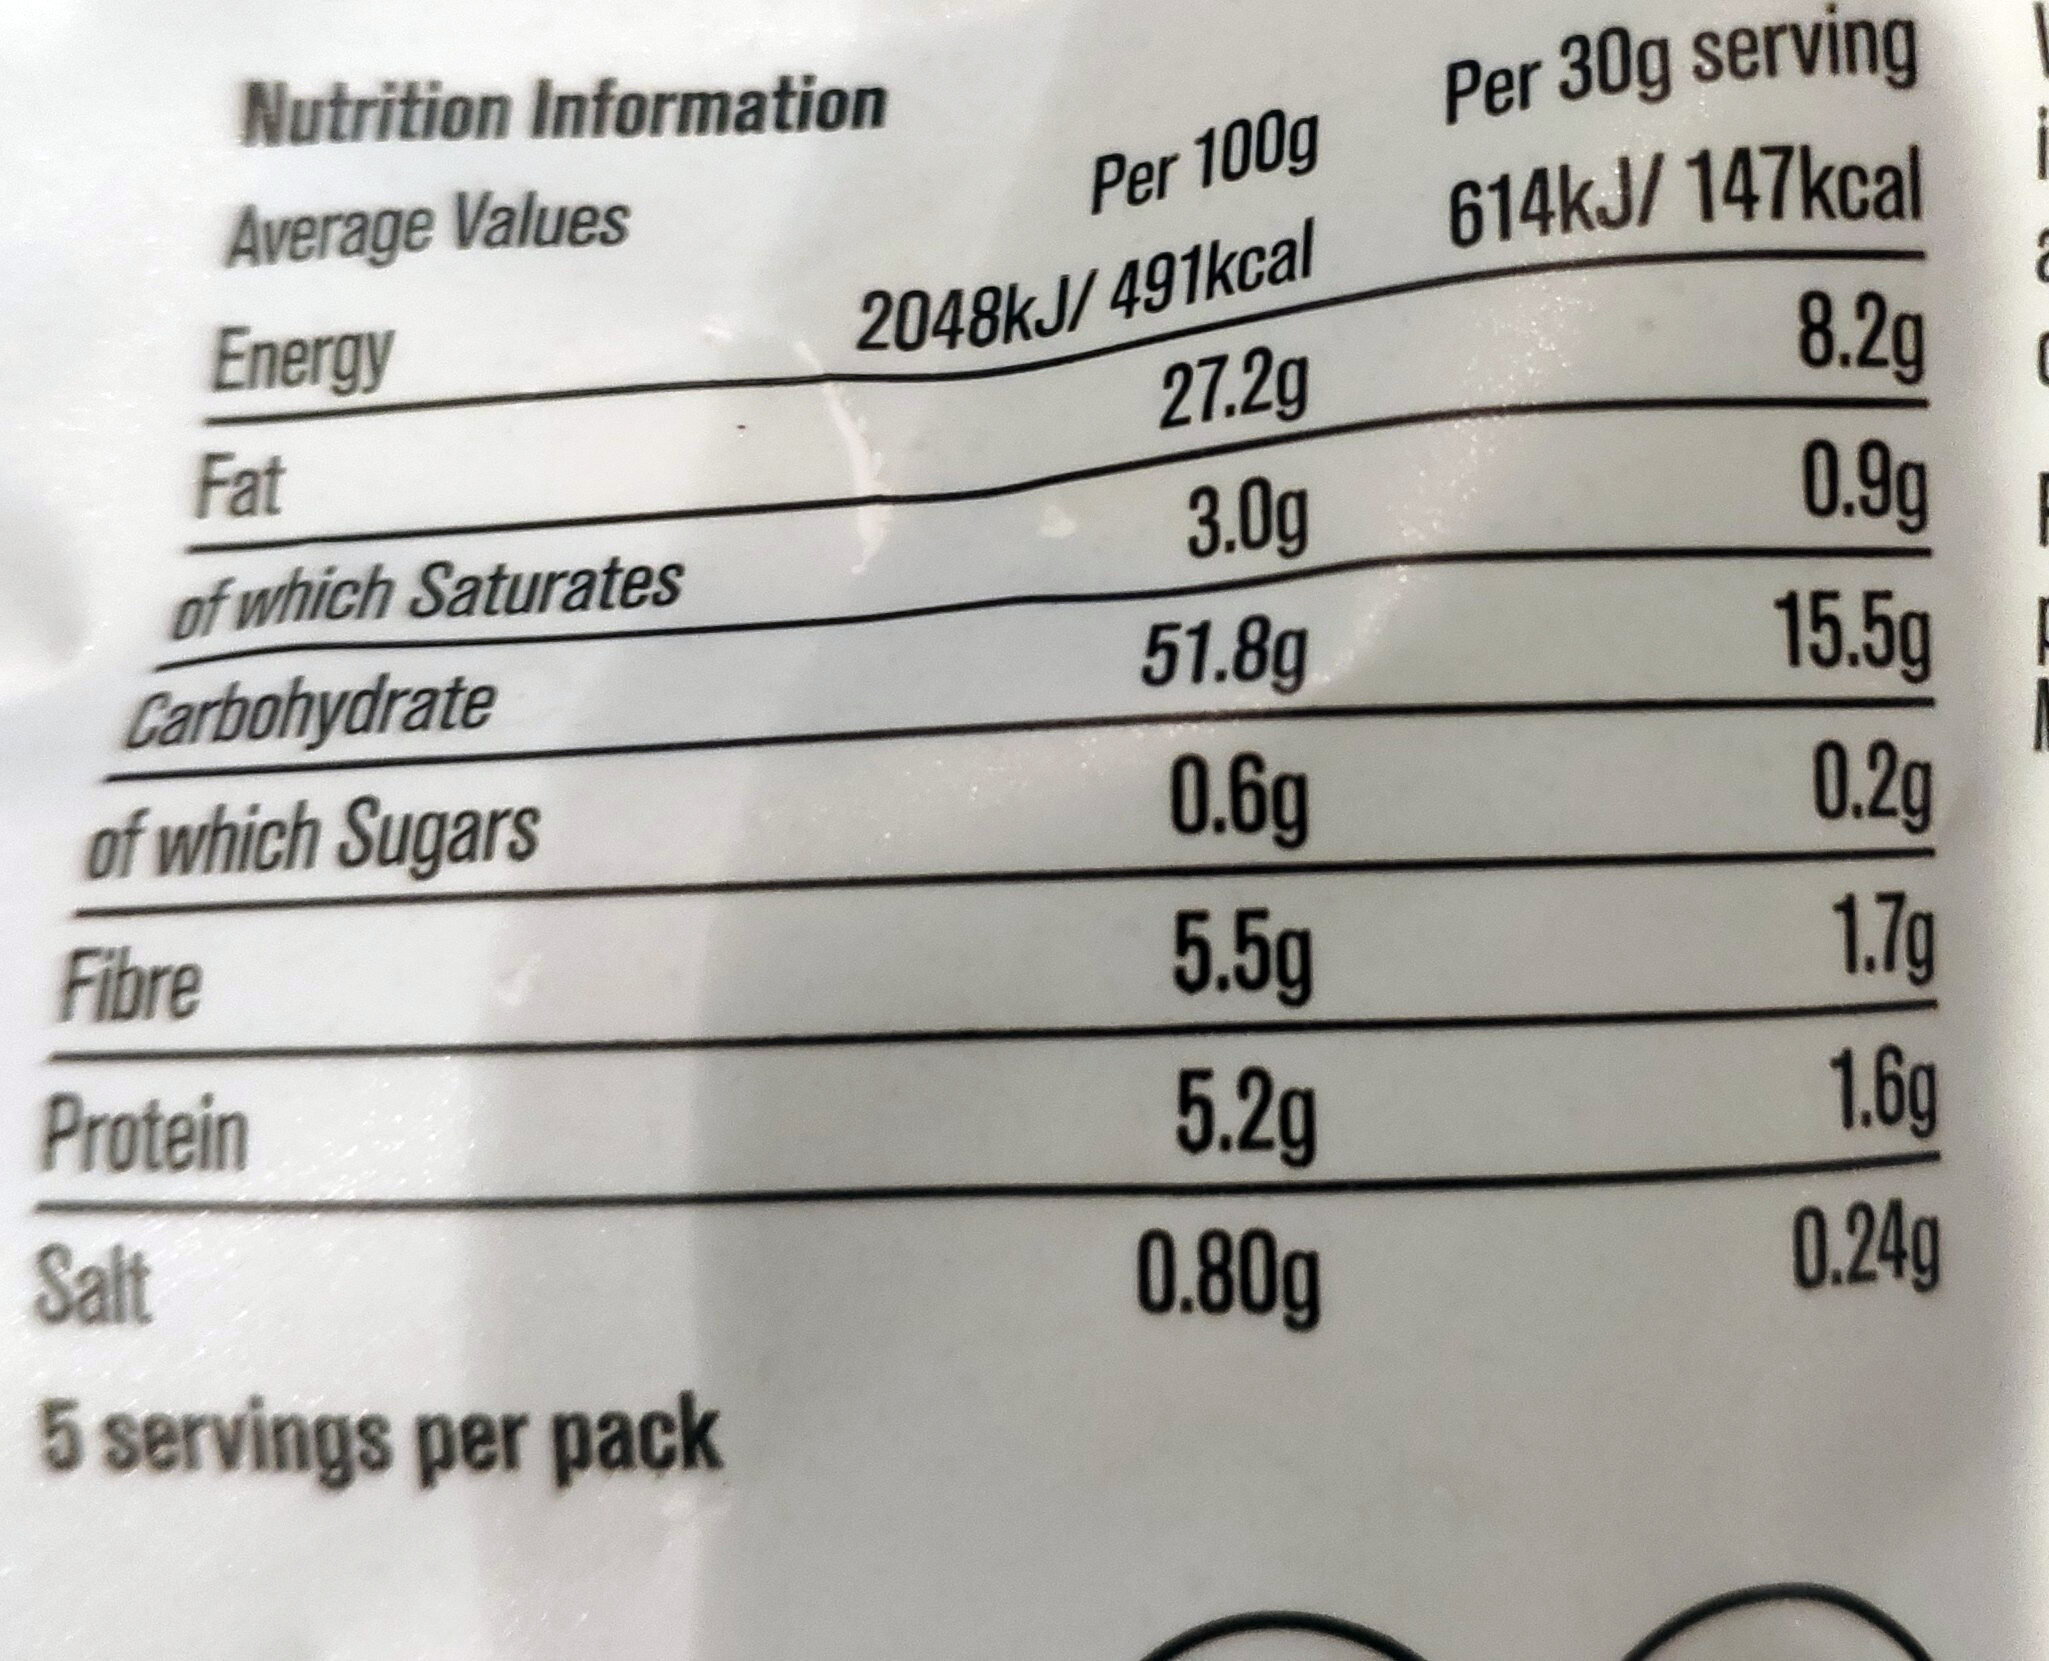 Lightly sea salted crisps - Nutrition facts